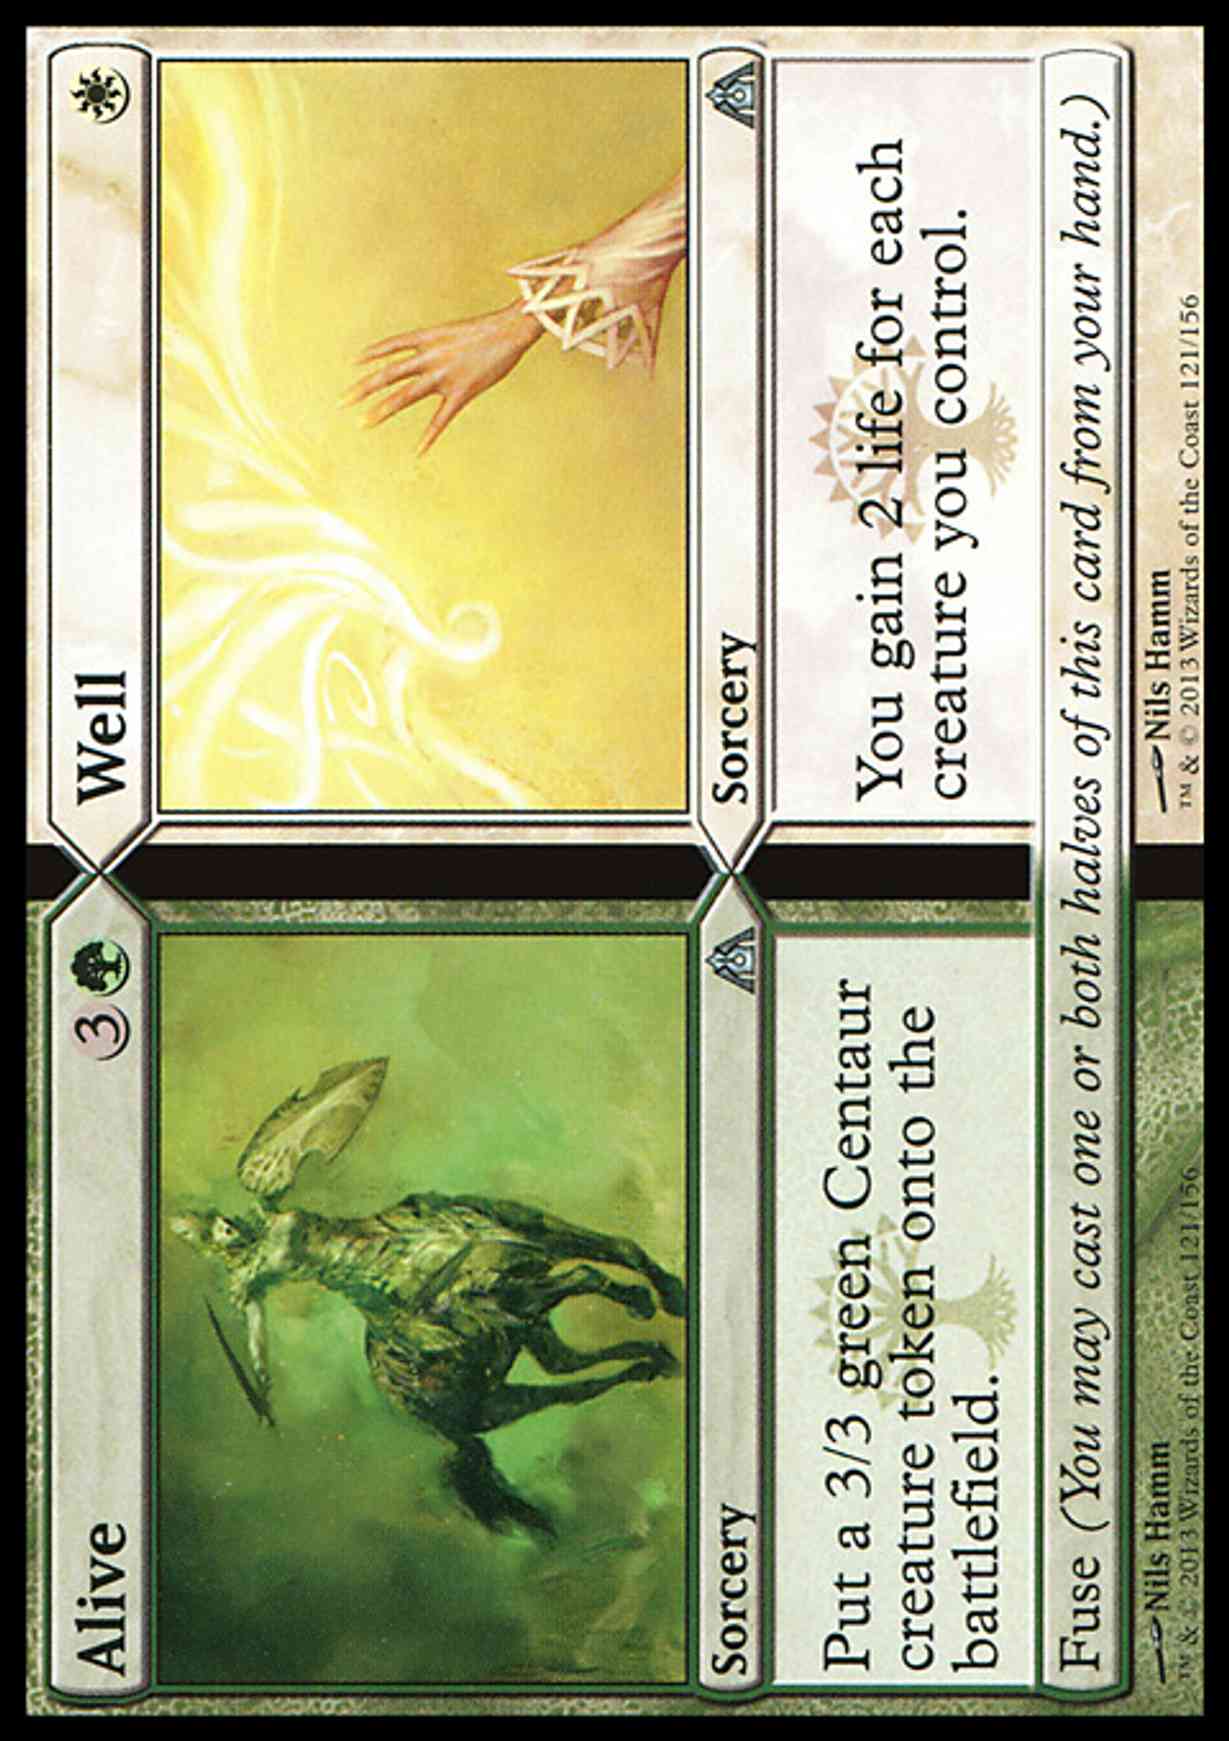 Alive // Well magic card front